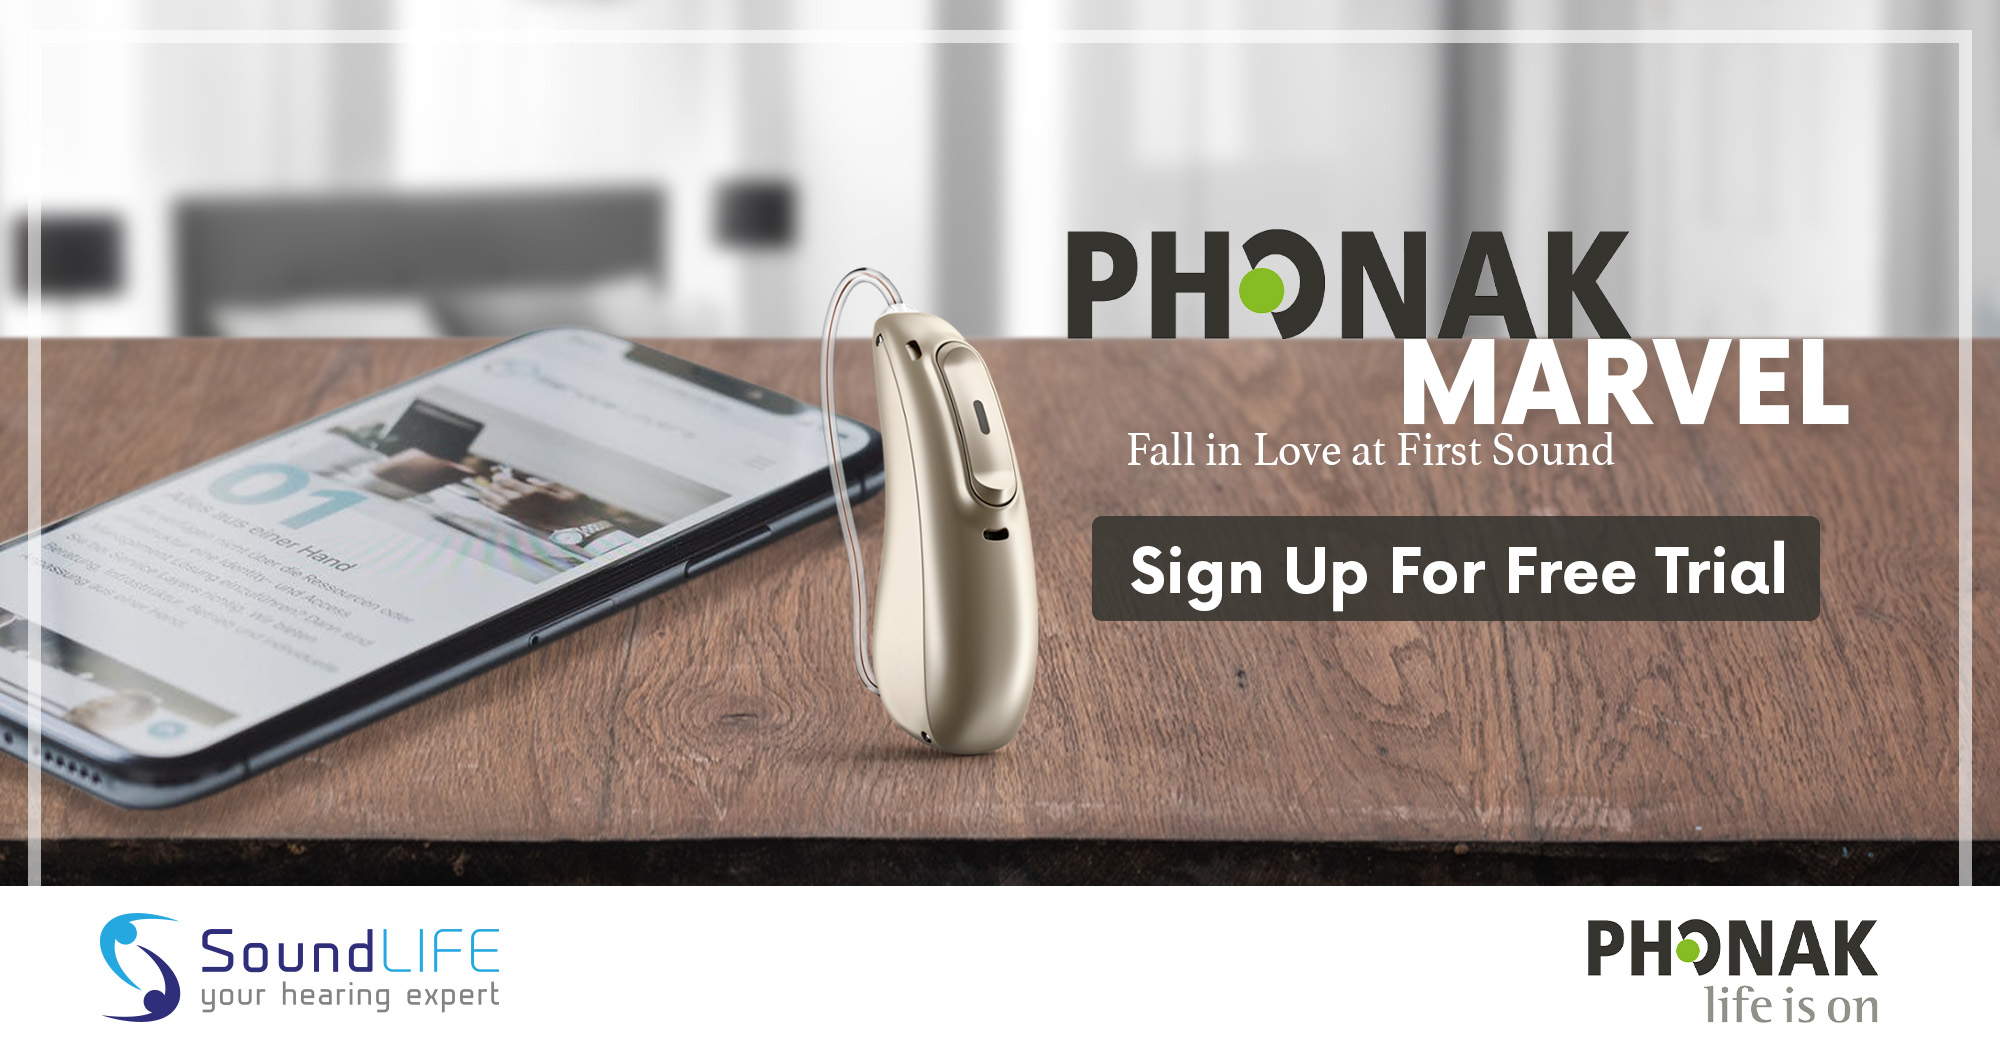 Soundlife Best Hearing Aids In 2019 Phonak Marvel Open Graph 01